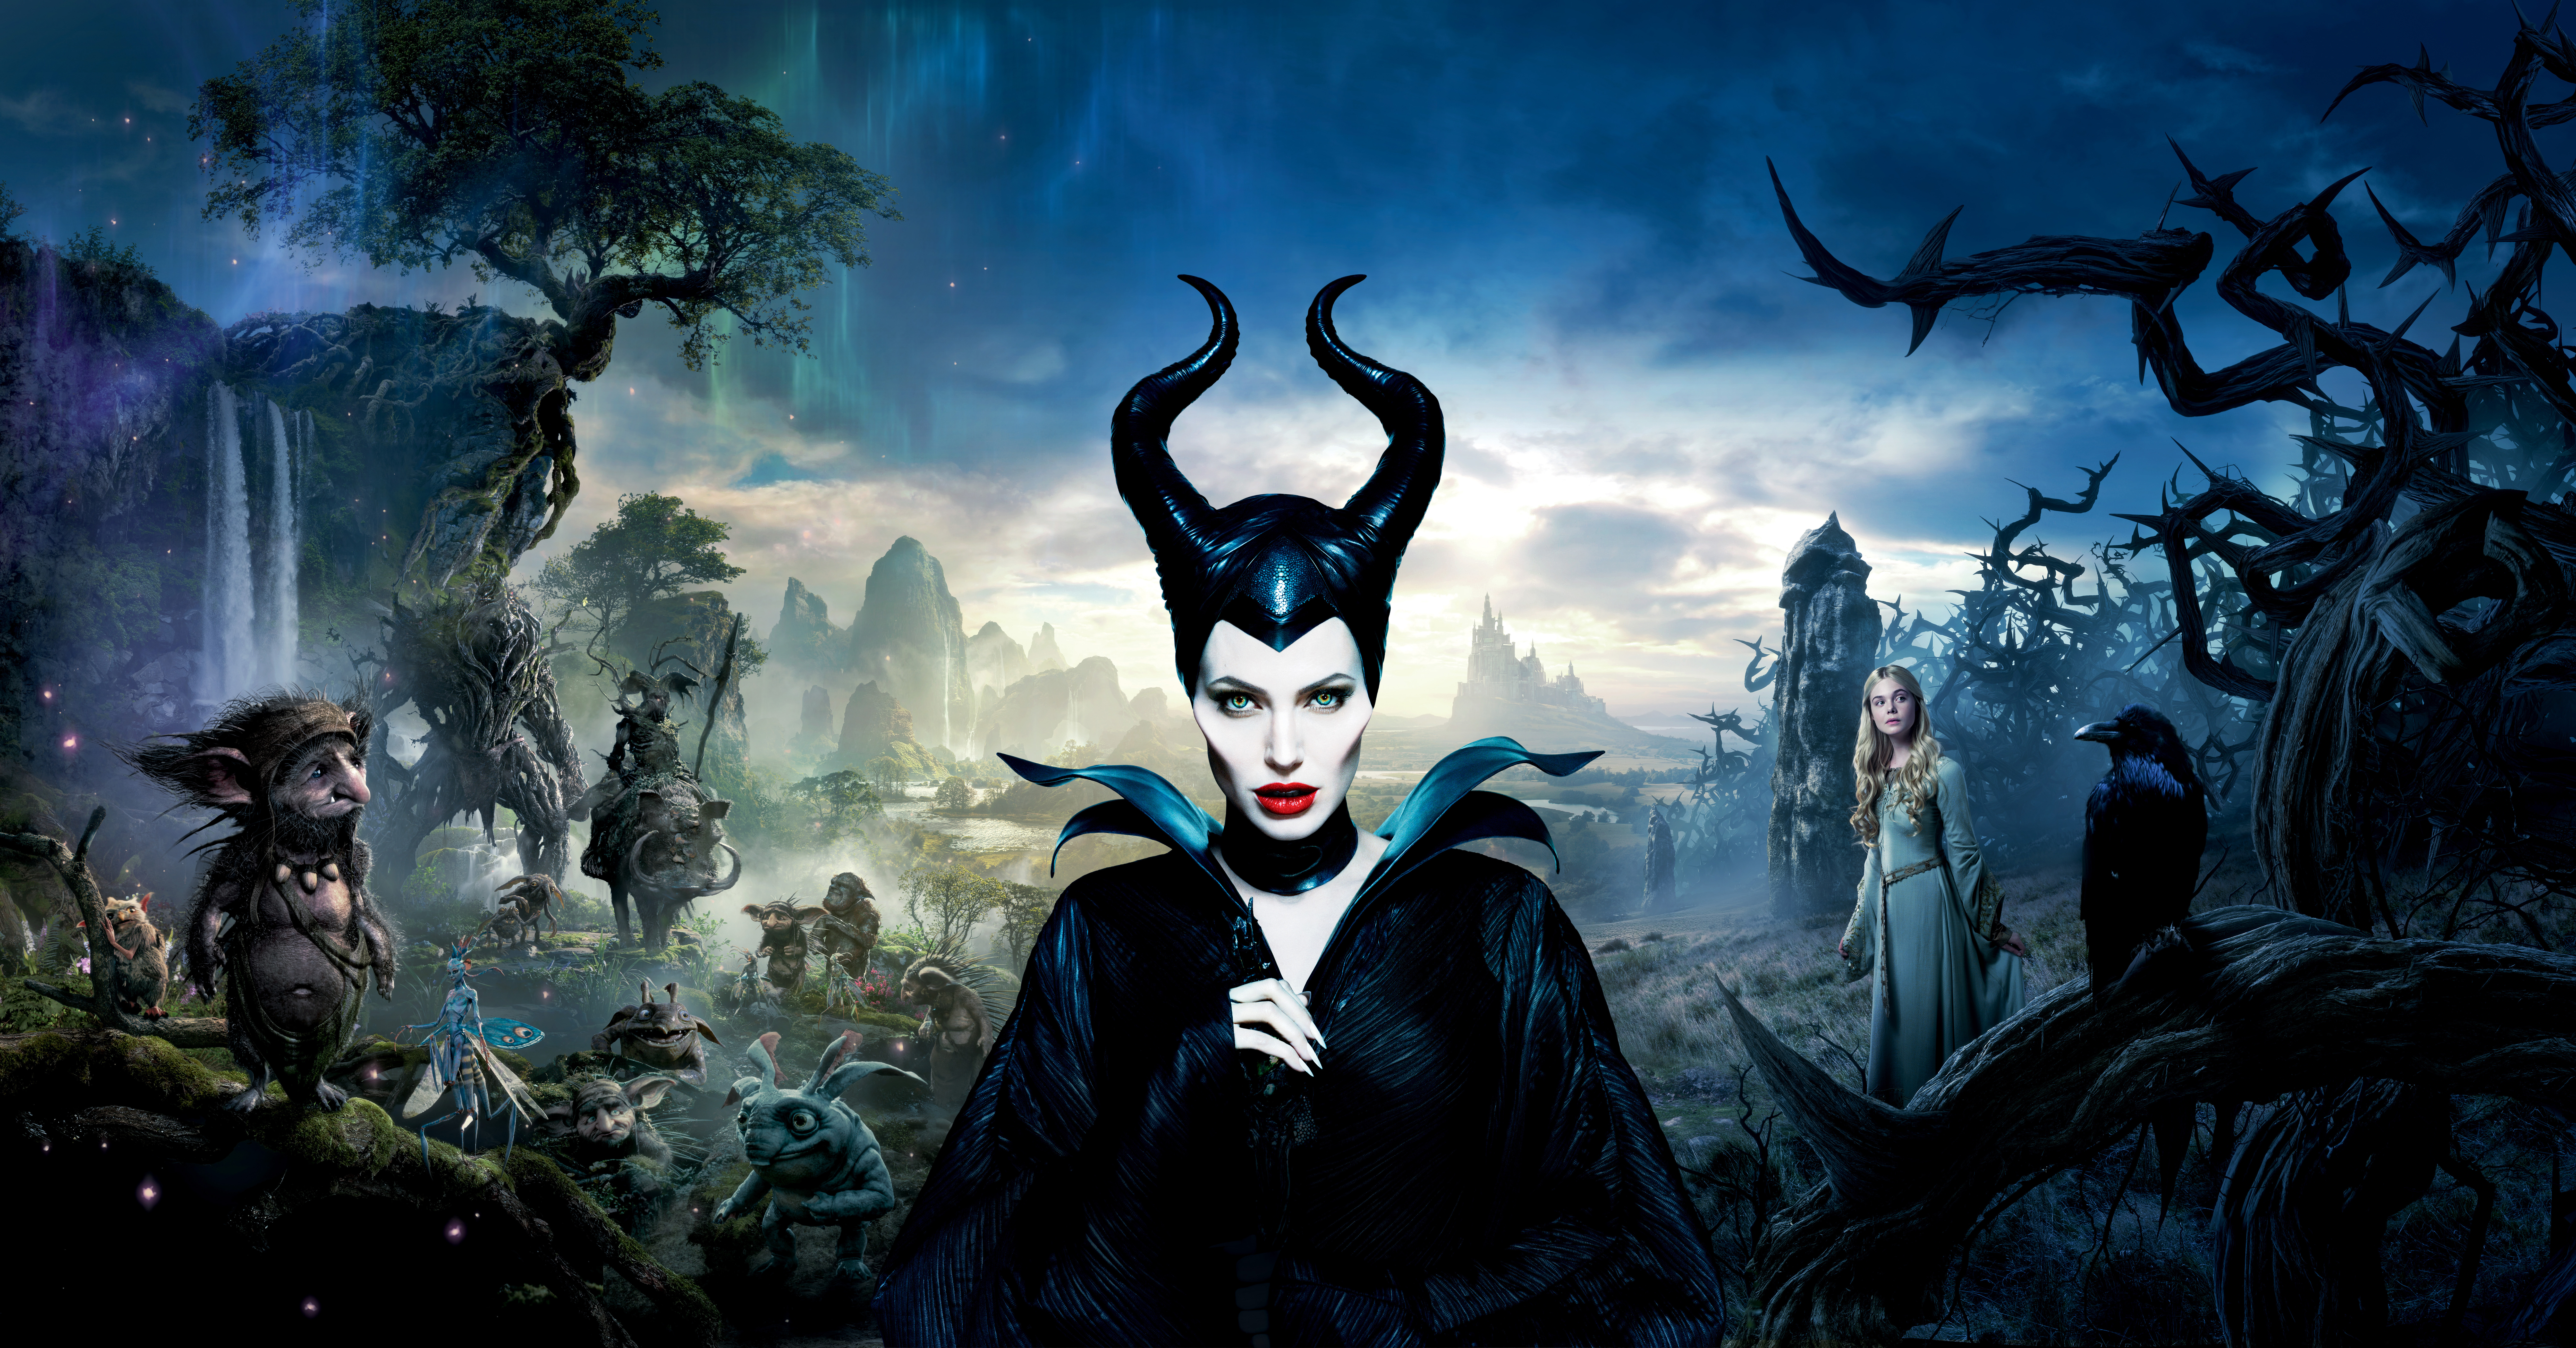 Wallpapers The movie Maleficent: mistress of the dark family fantasy on the desktop